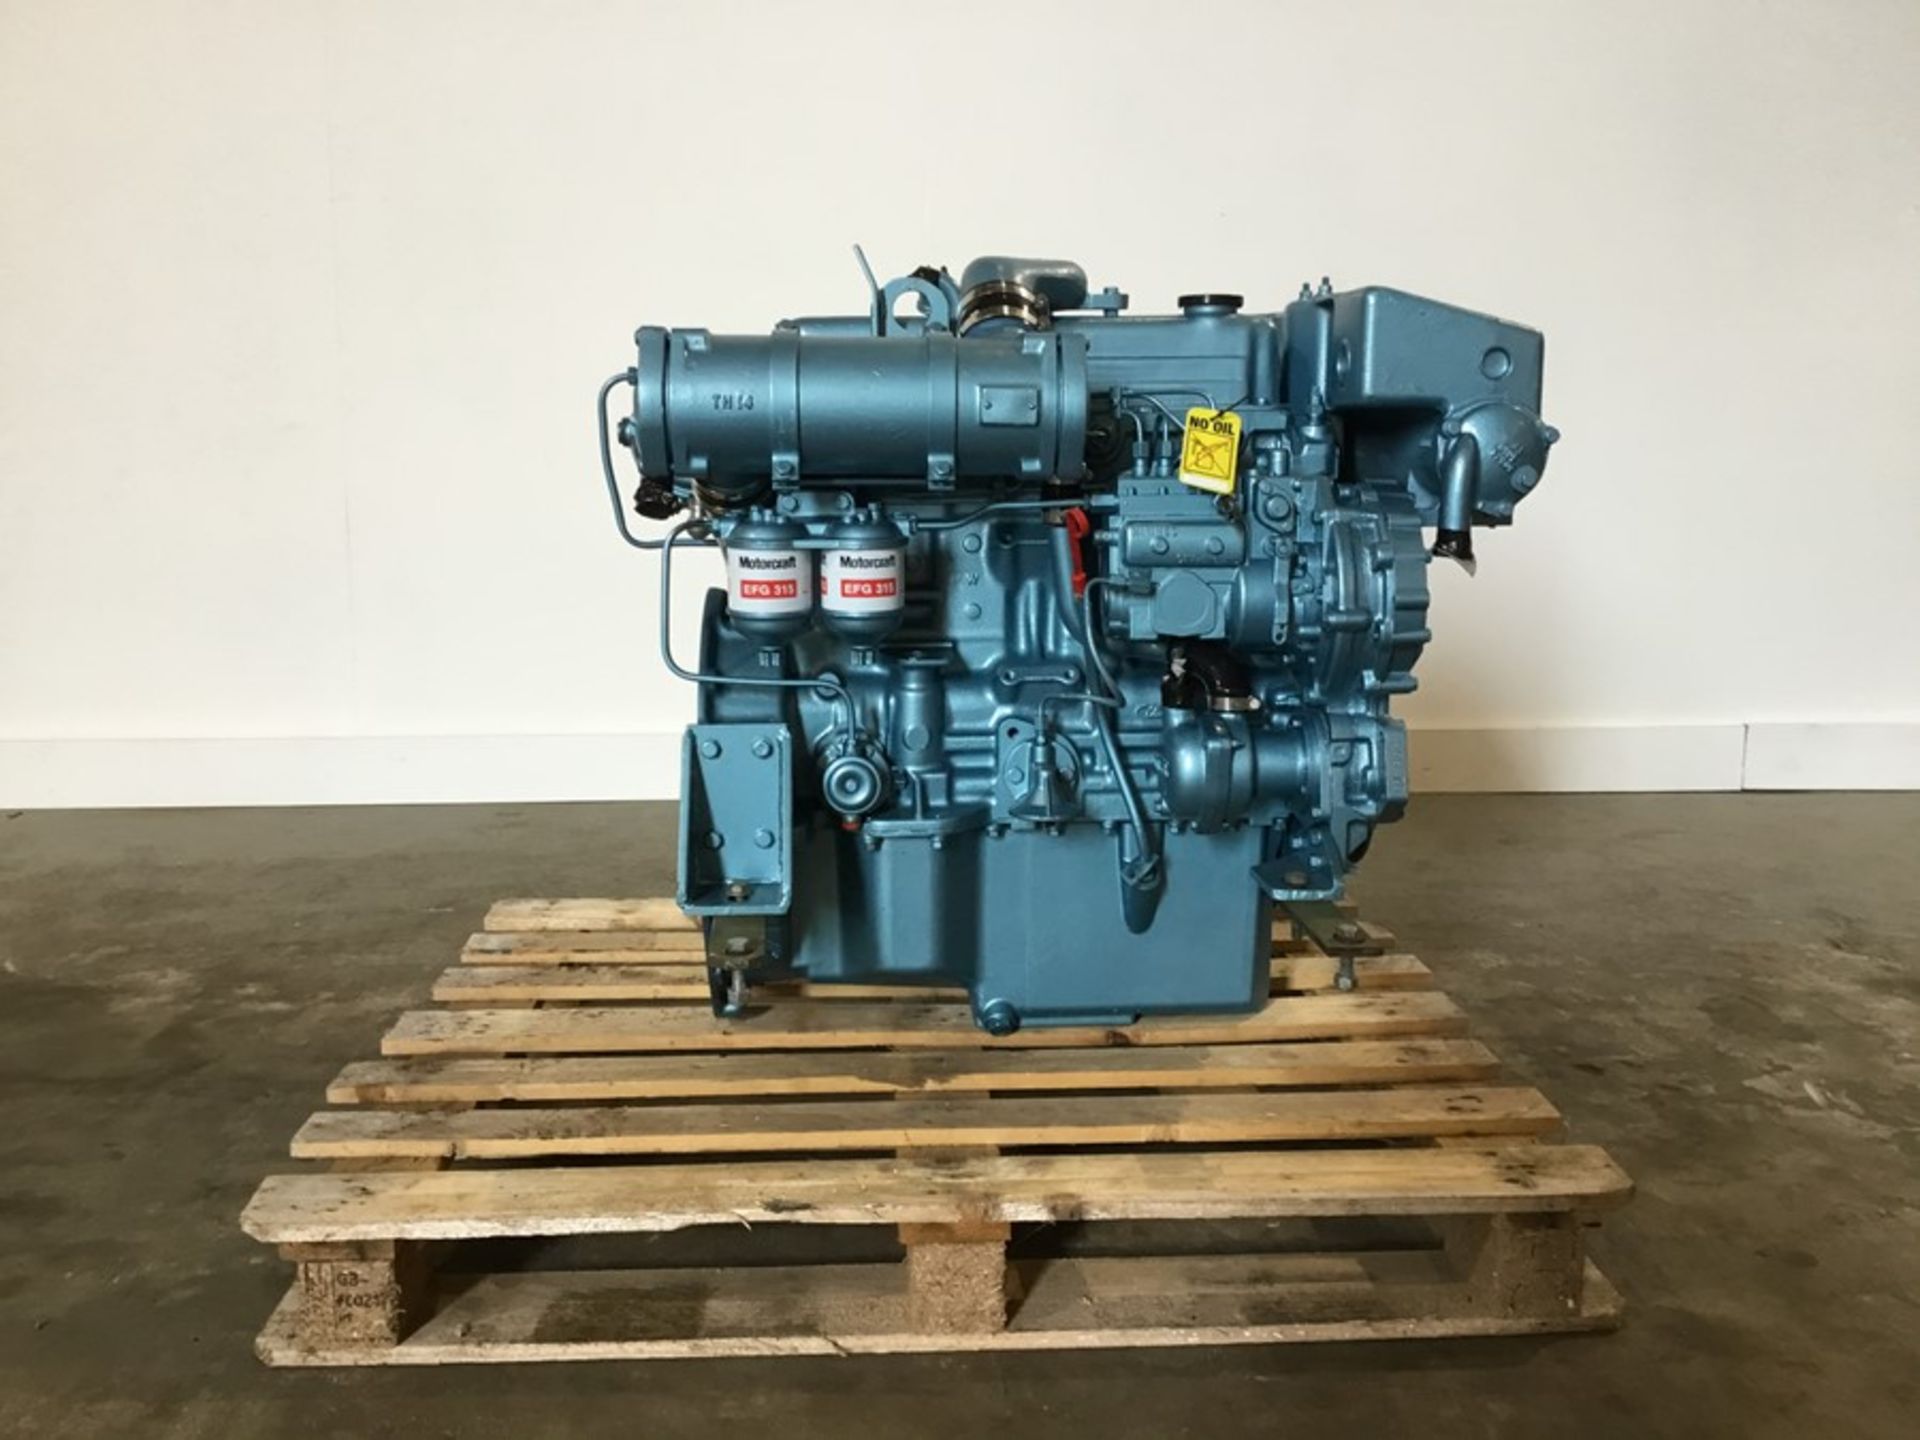 Ford 2722E Marine Diesel engine: Ford 2722e 4cyl Turbo 140Hp @2500Rpm used low hours - Image 11 of 18